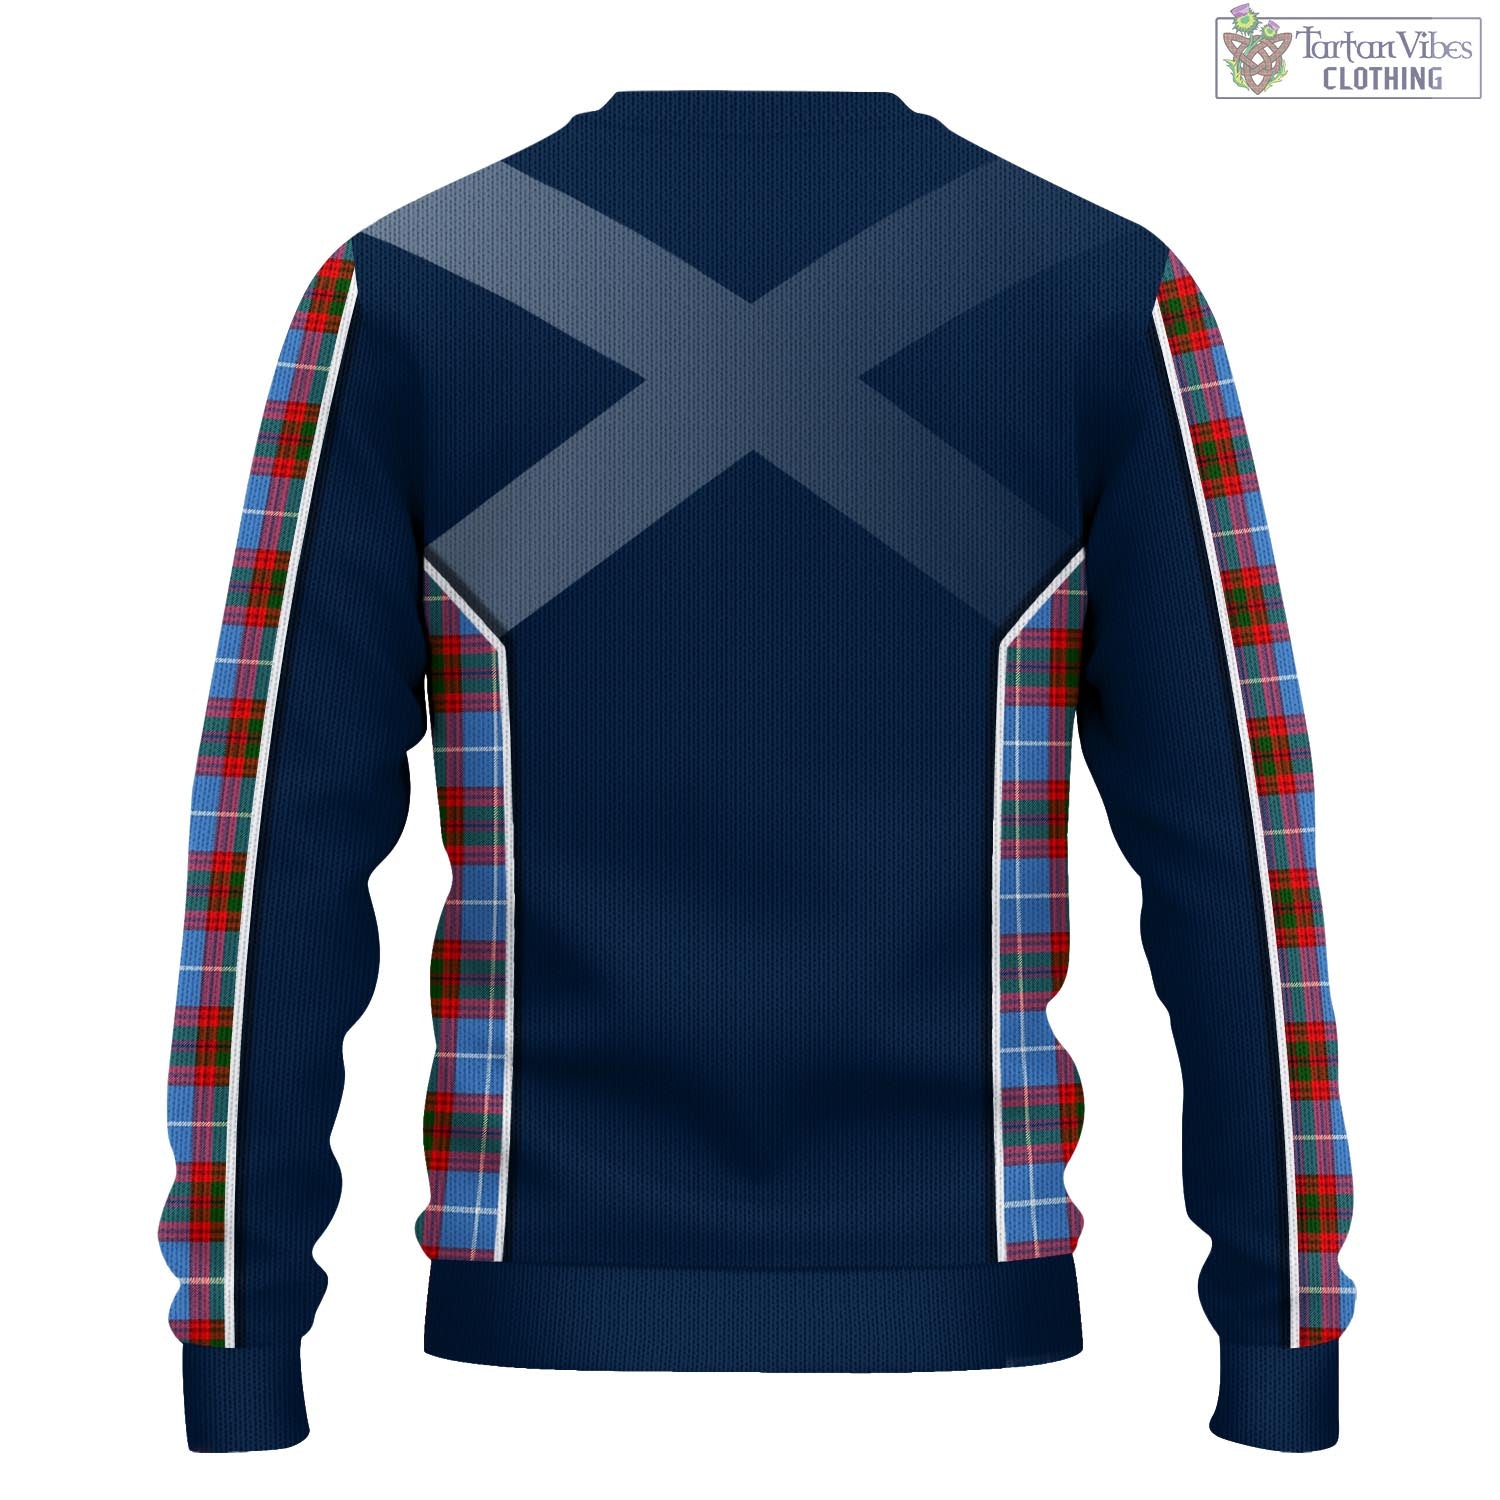 Tartan Vibes Clothing Dalmahoy Tartan Knitted Sweatshirt with Family Crest and Scottish Thistle Vibes Sport Style